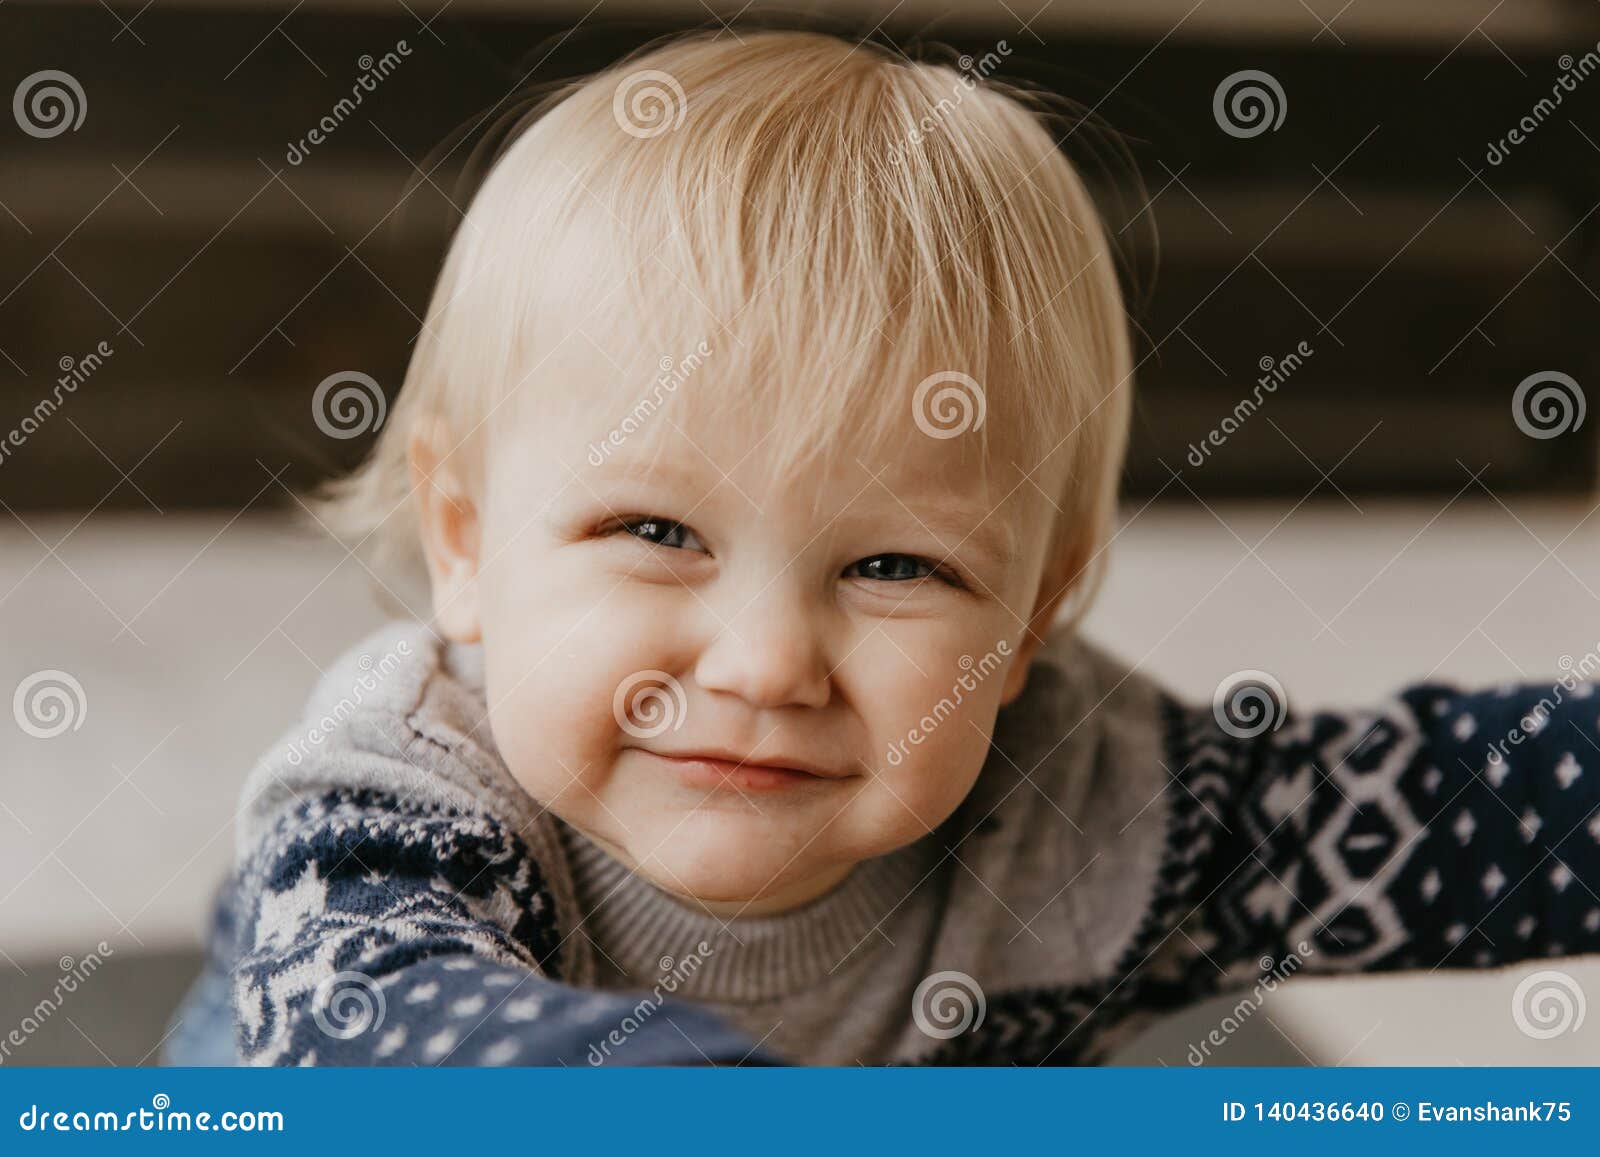 Download Cute Adorable Little Blonde Toddler Kid Laughing, Having Fun, And Making Silly Faces Outside At ...